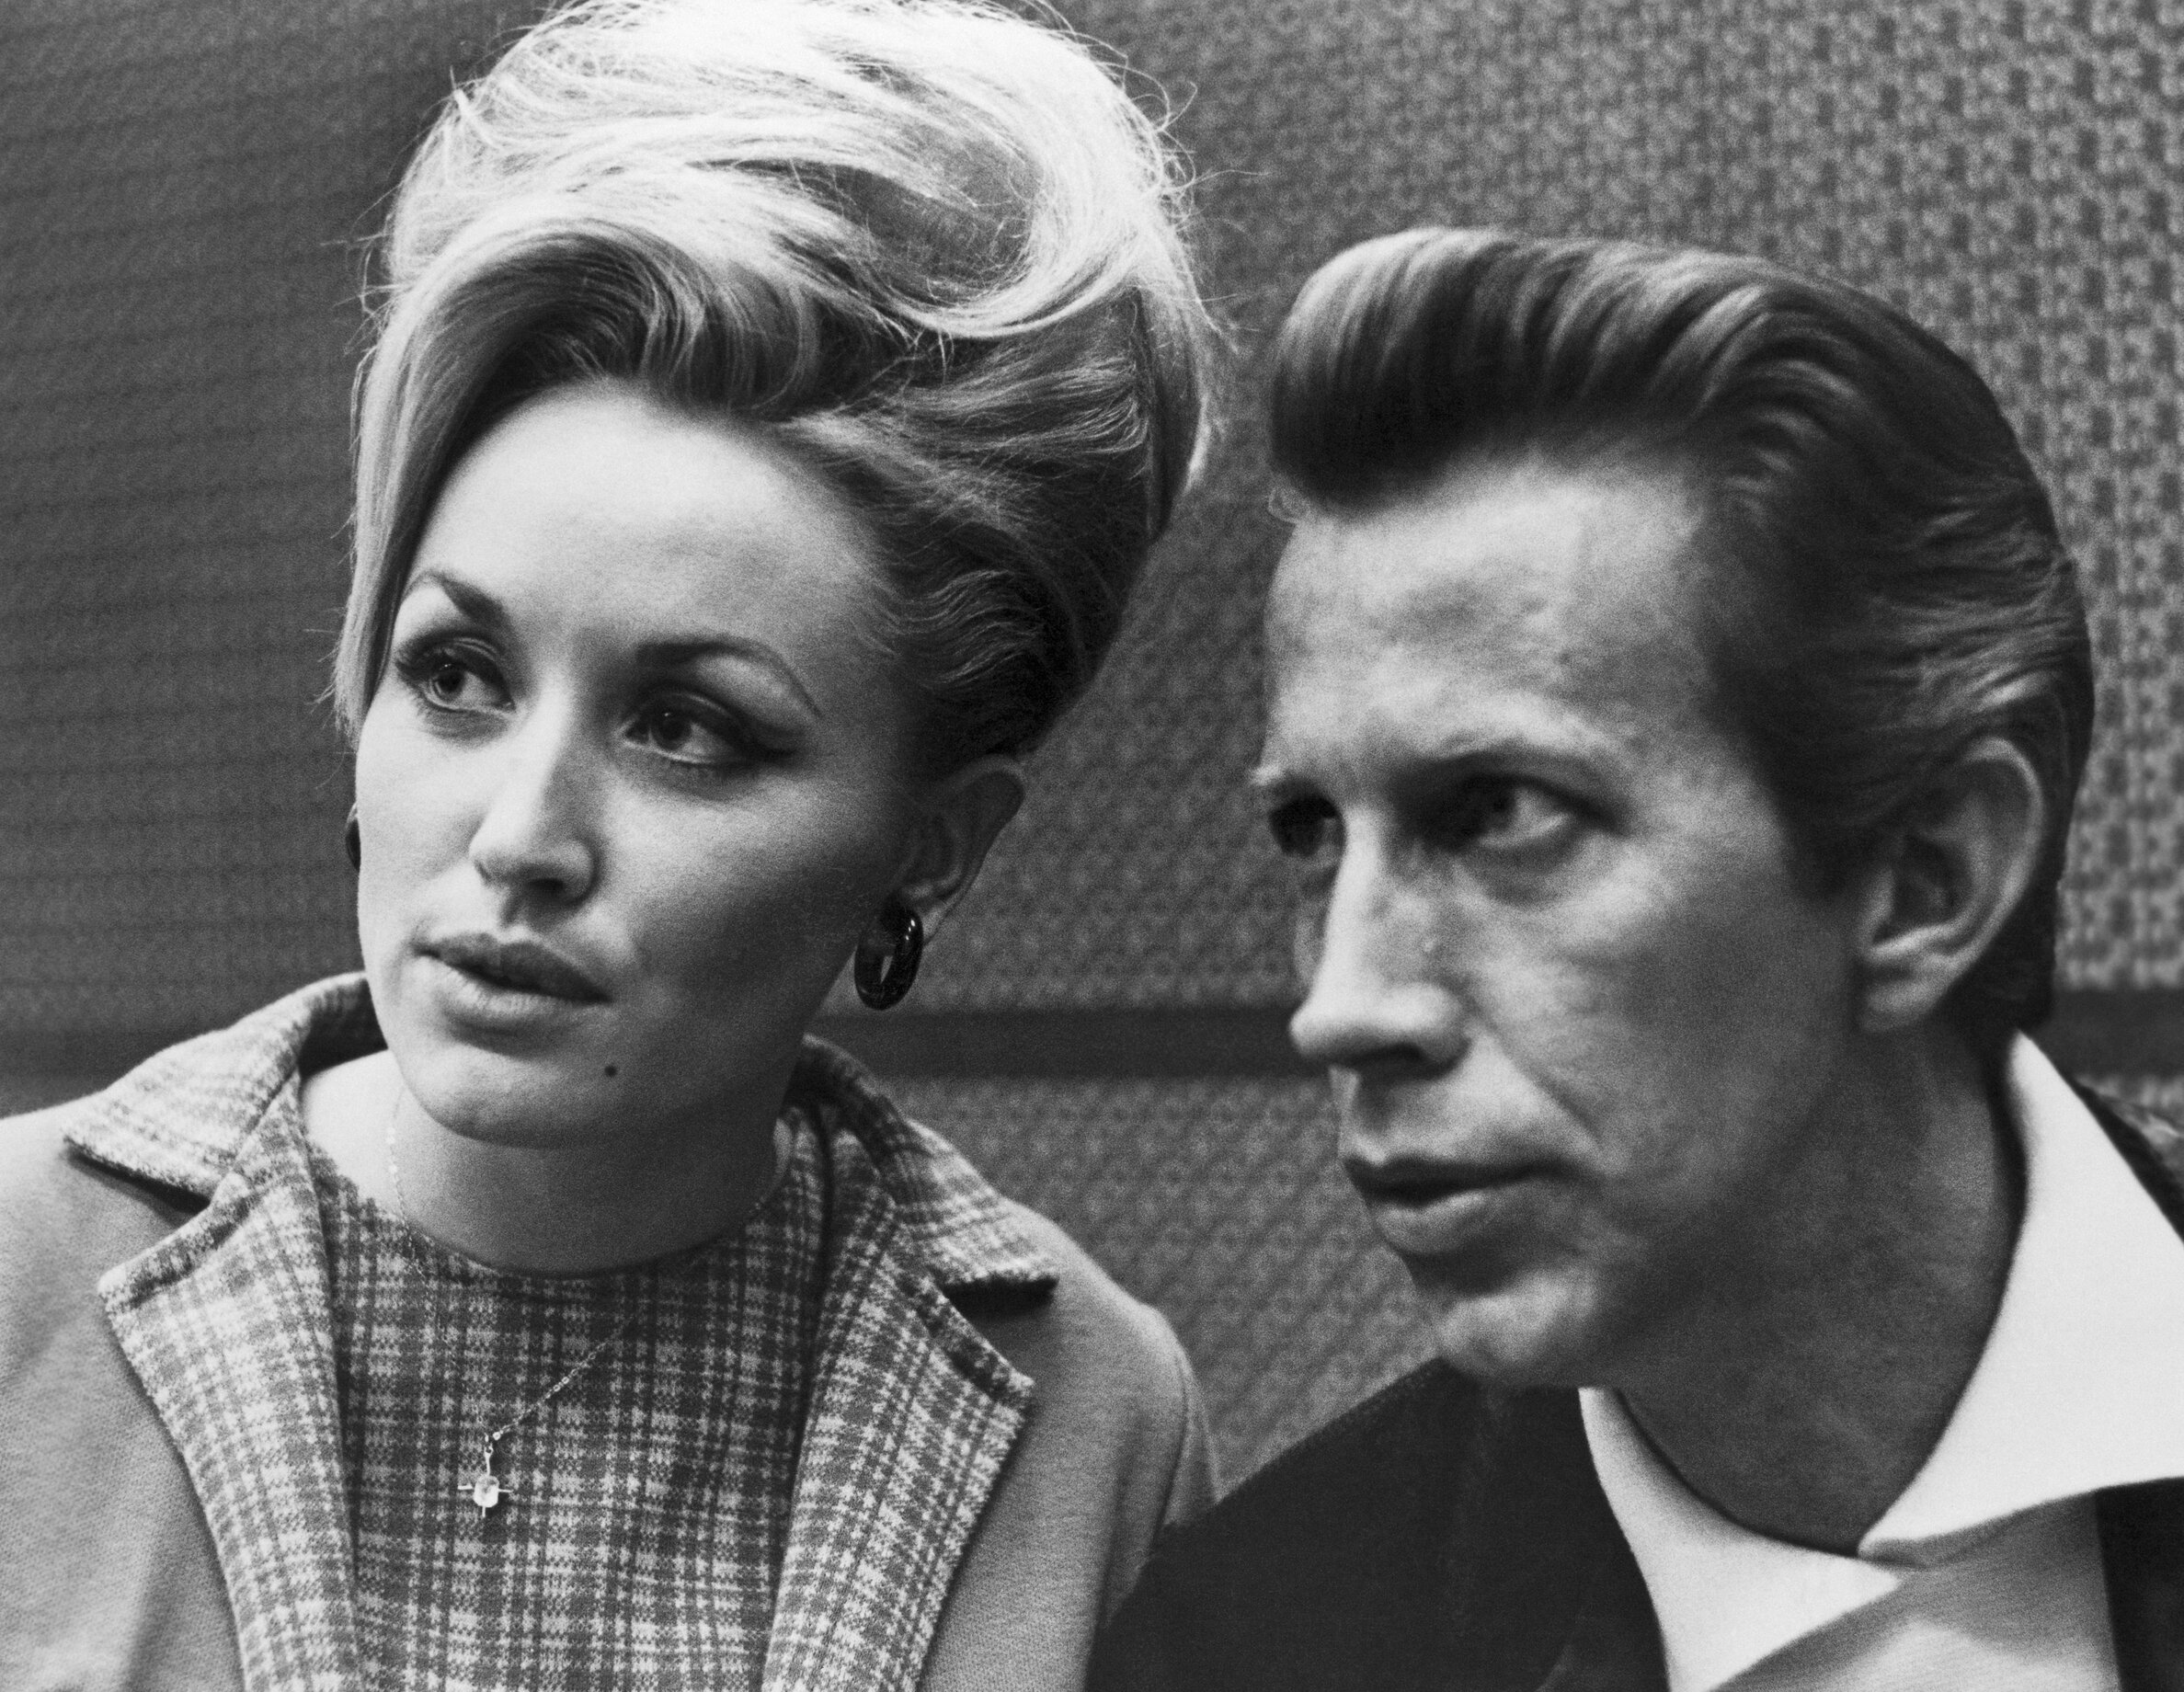 Dolly Parton and Porter Wagoner look off to the right in an old black and white photo.